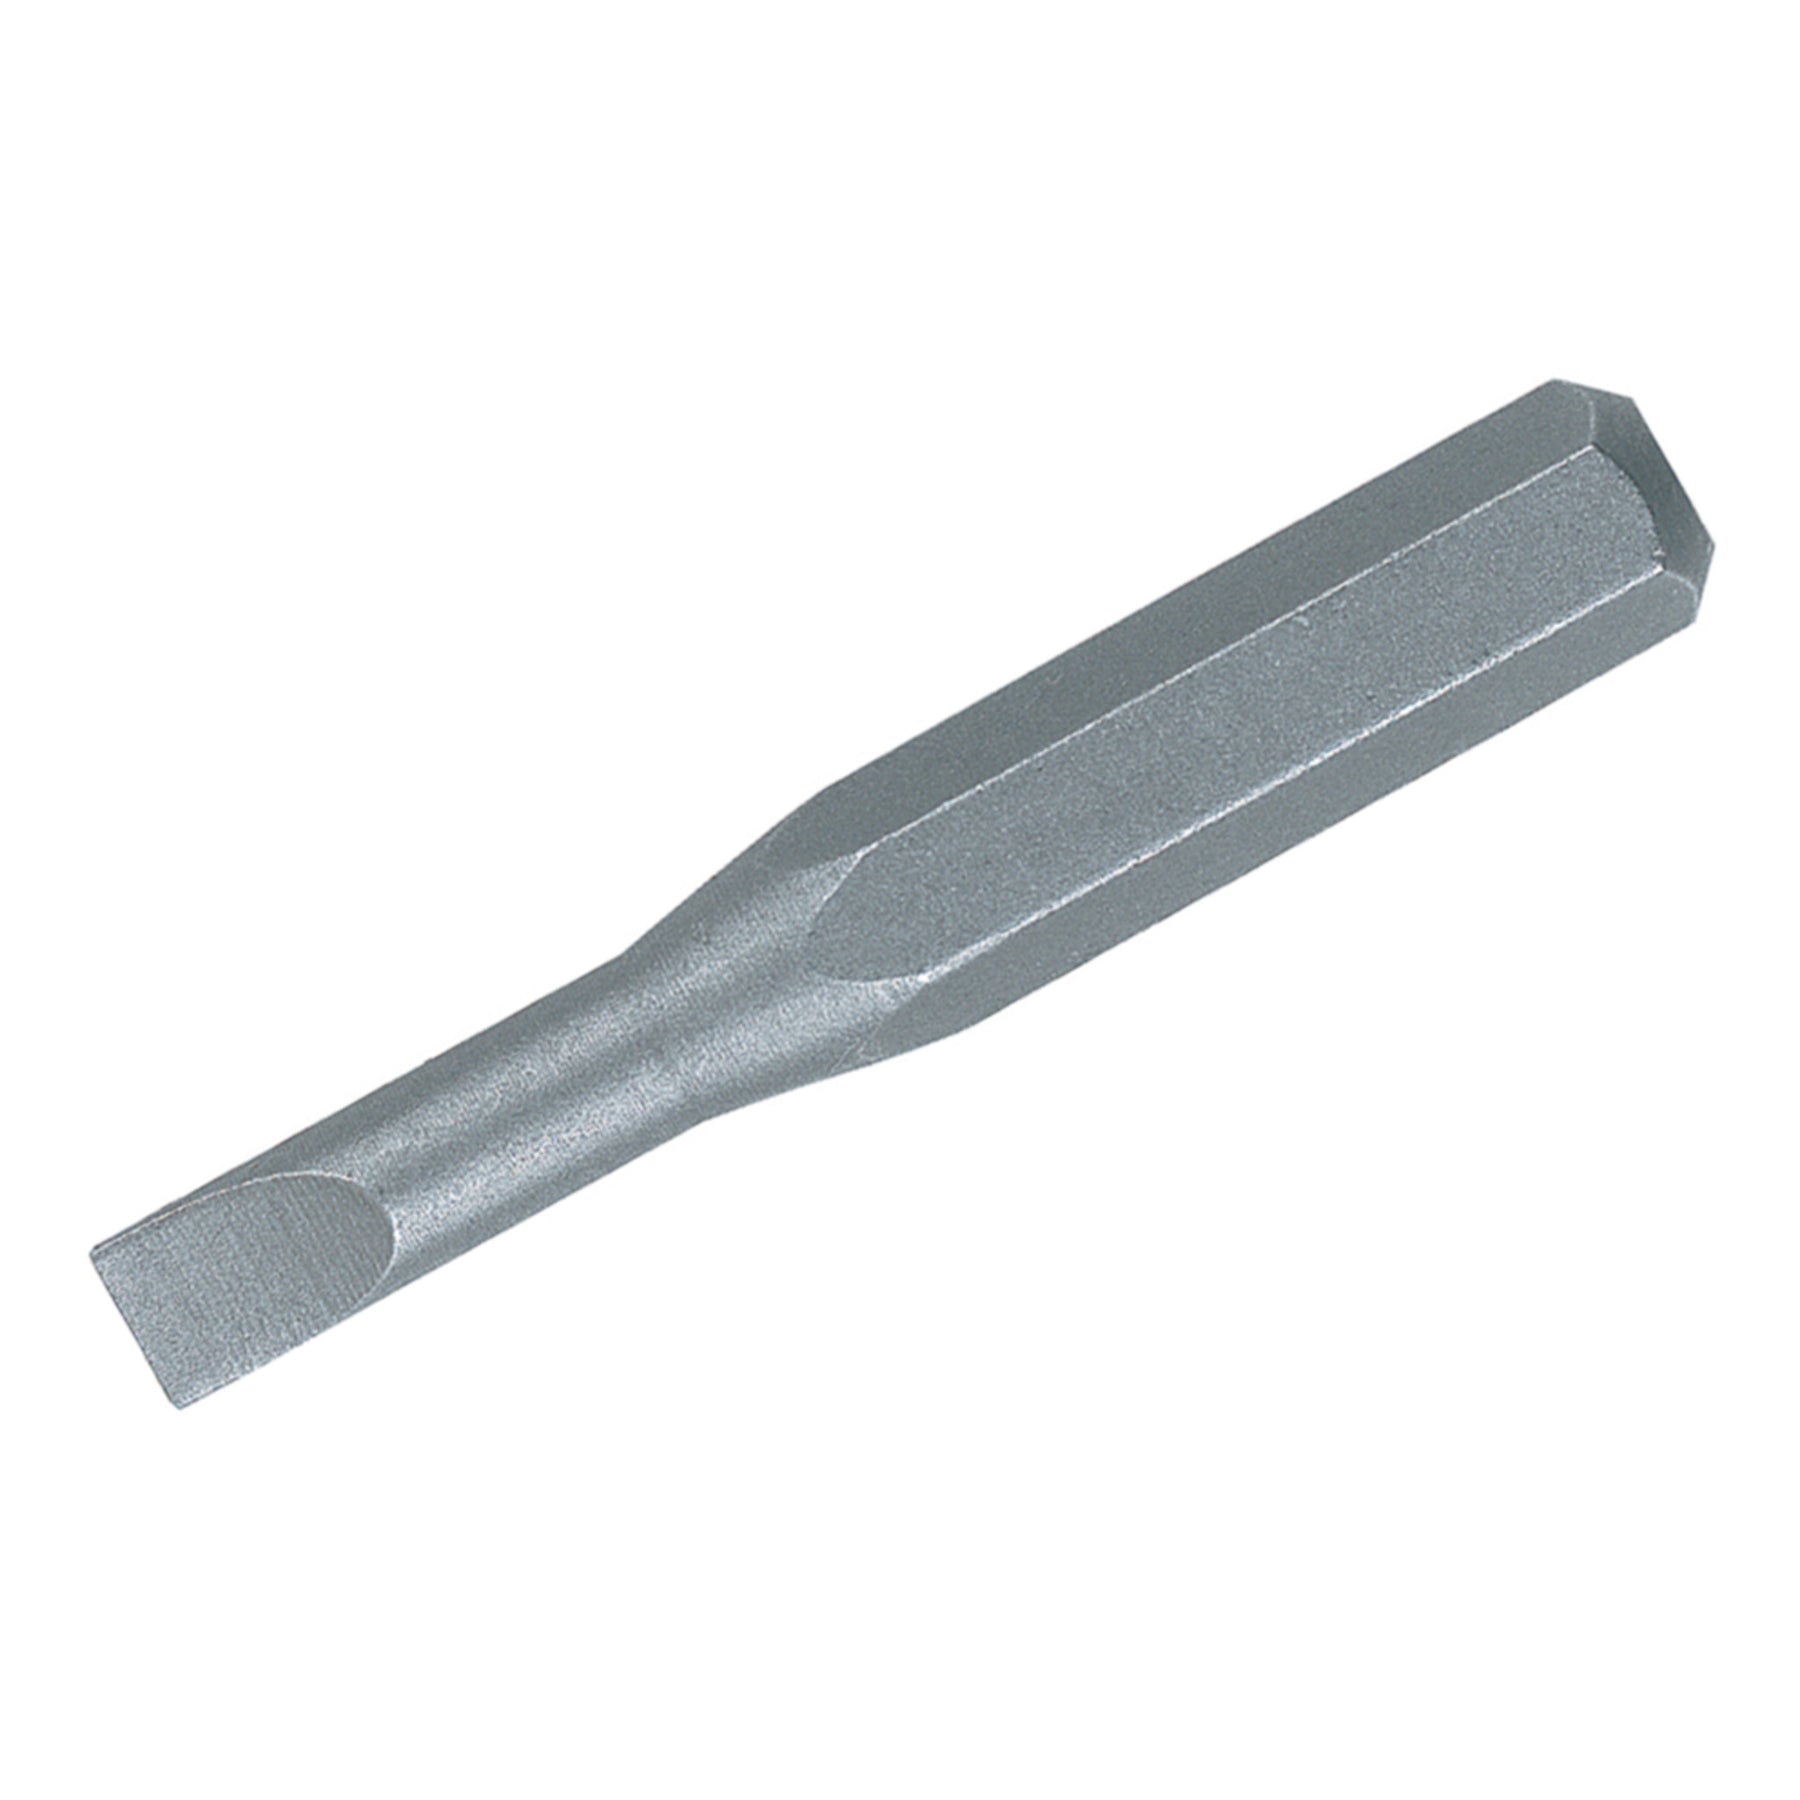 Wiha 75030 System 4 Slotted MicroBits 3.0 x 28mm